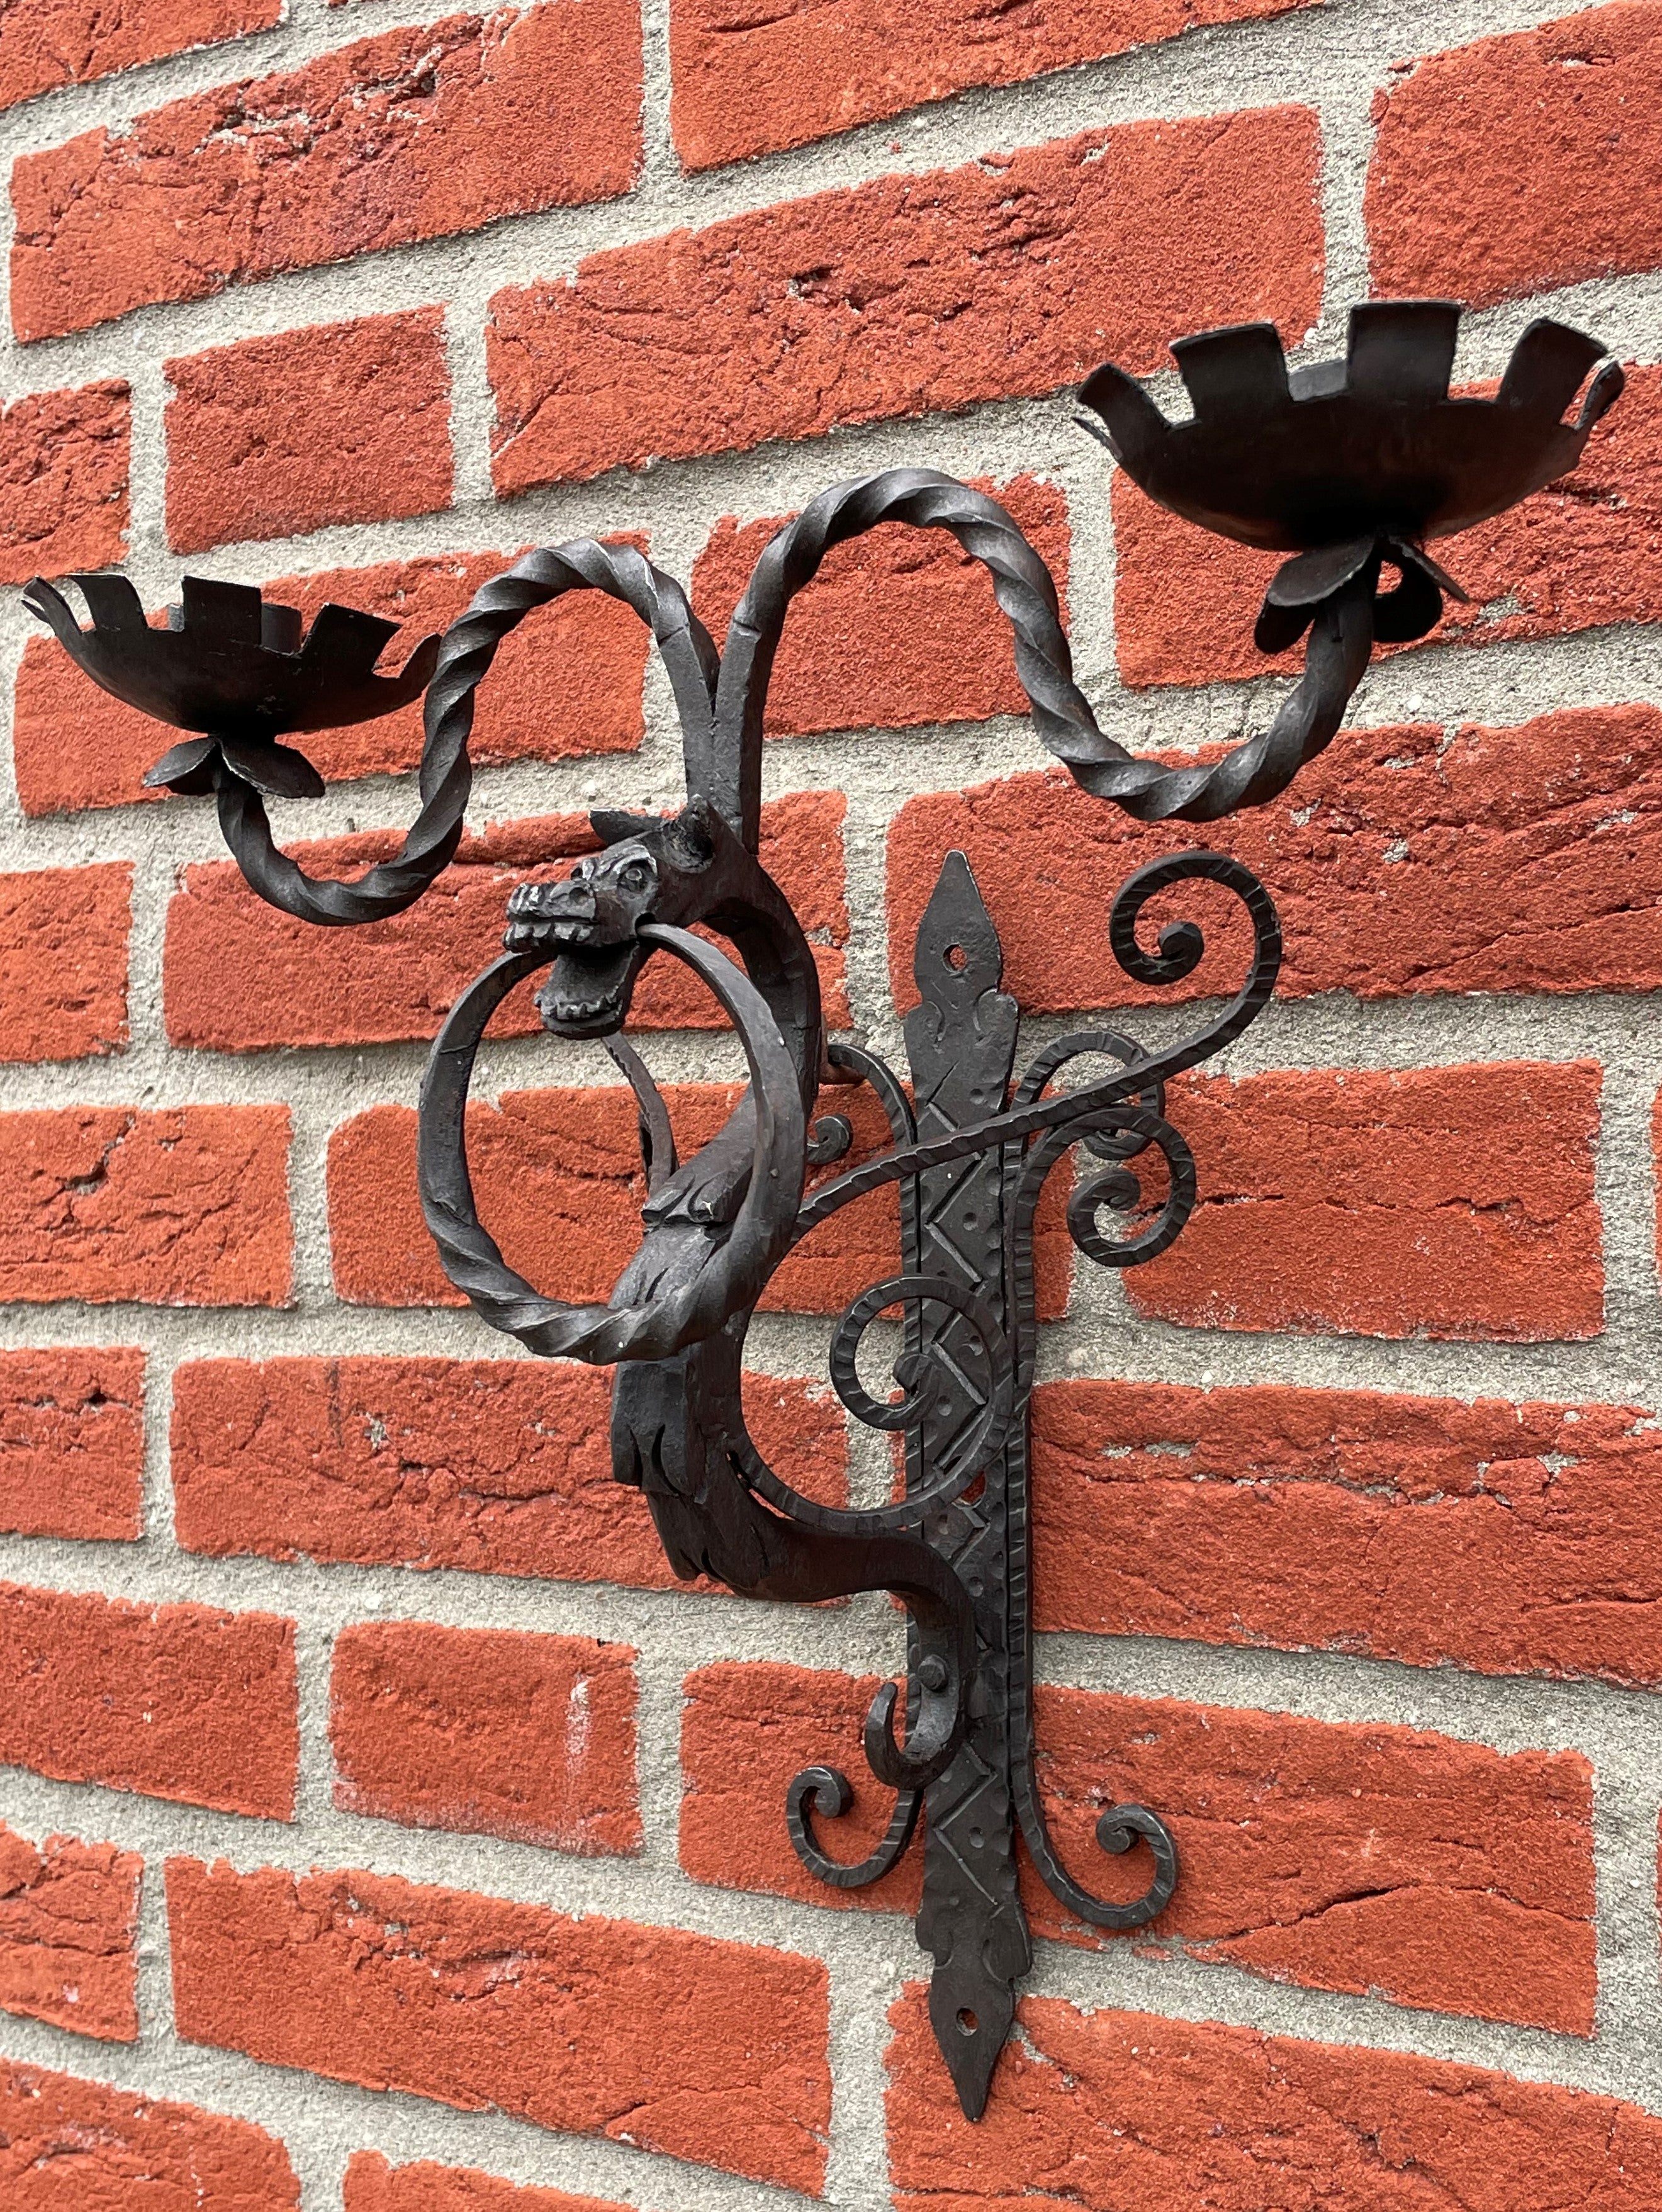 Stylish and highly decorative set of Medieval Style candle sconces.

With early 20th century Gothic Art as one of our specialities, we have seen and sold a lot of great and unique pieces, but never did we come across a set of seven hand forged